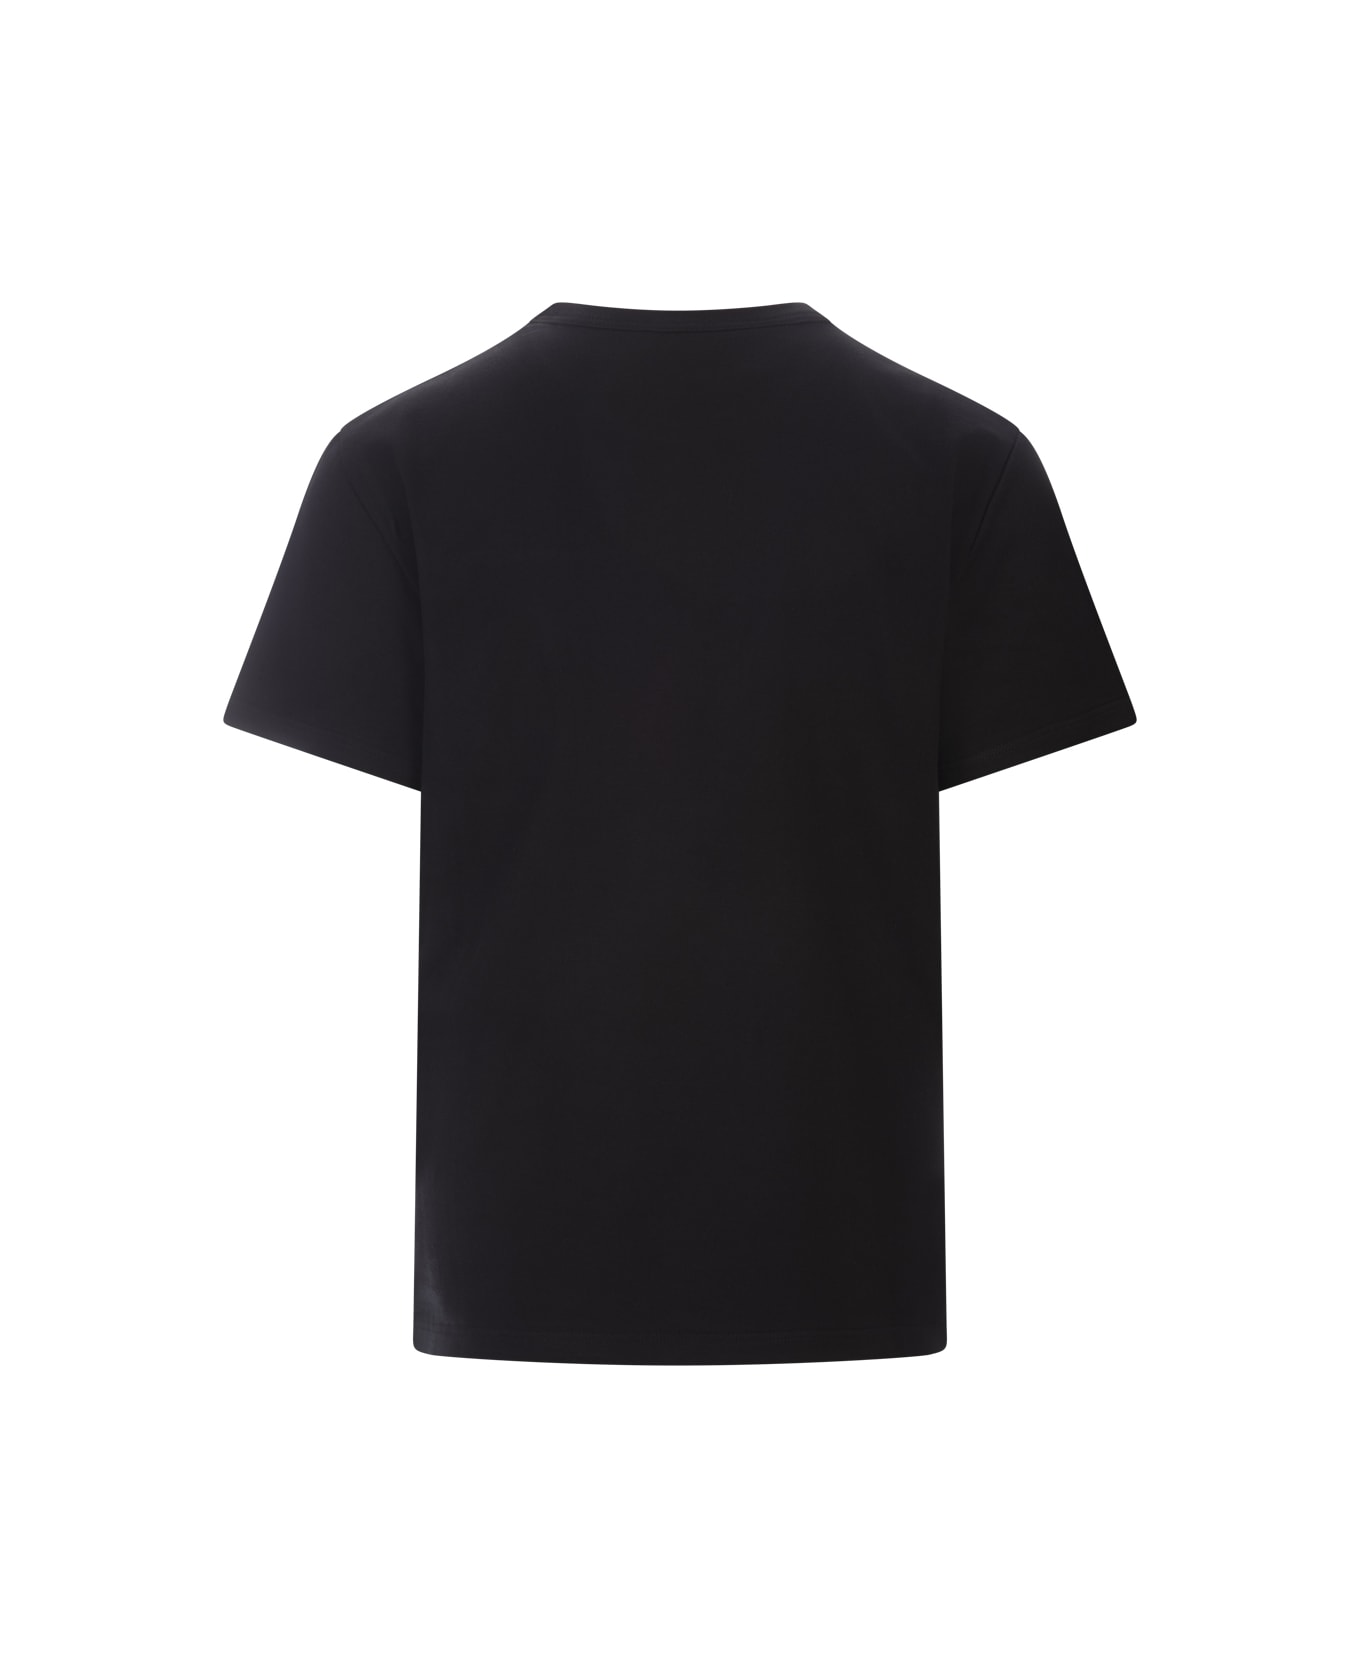 Alexander McQueen Black T-shirt With Two-tone Logo - Black